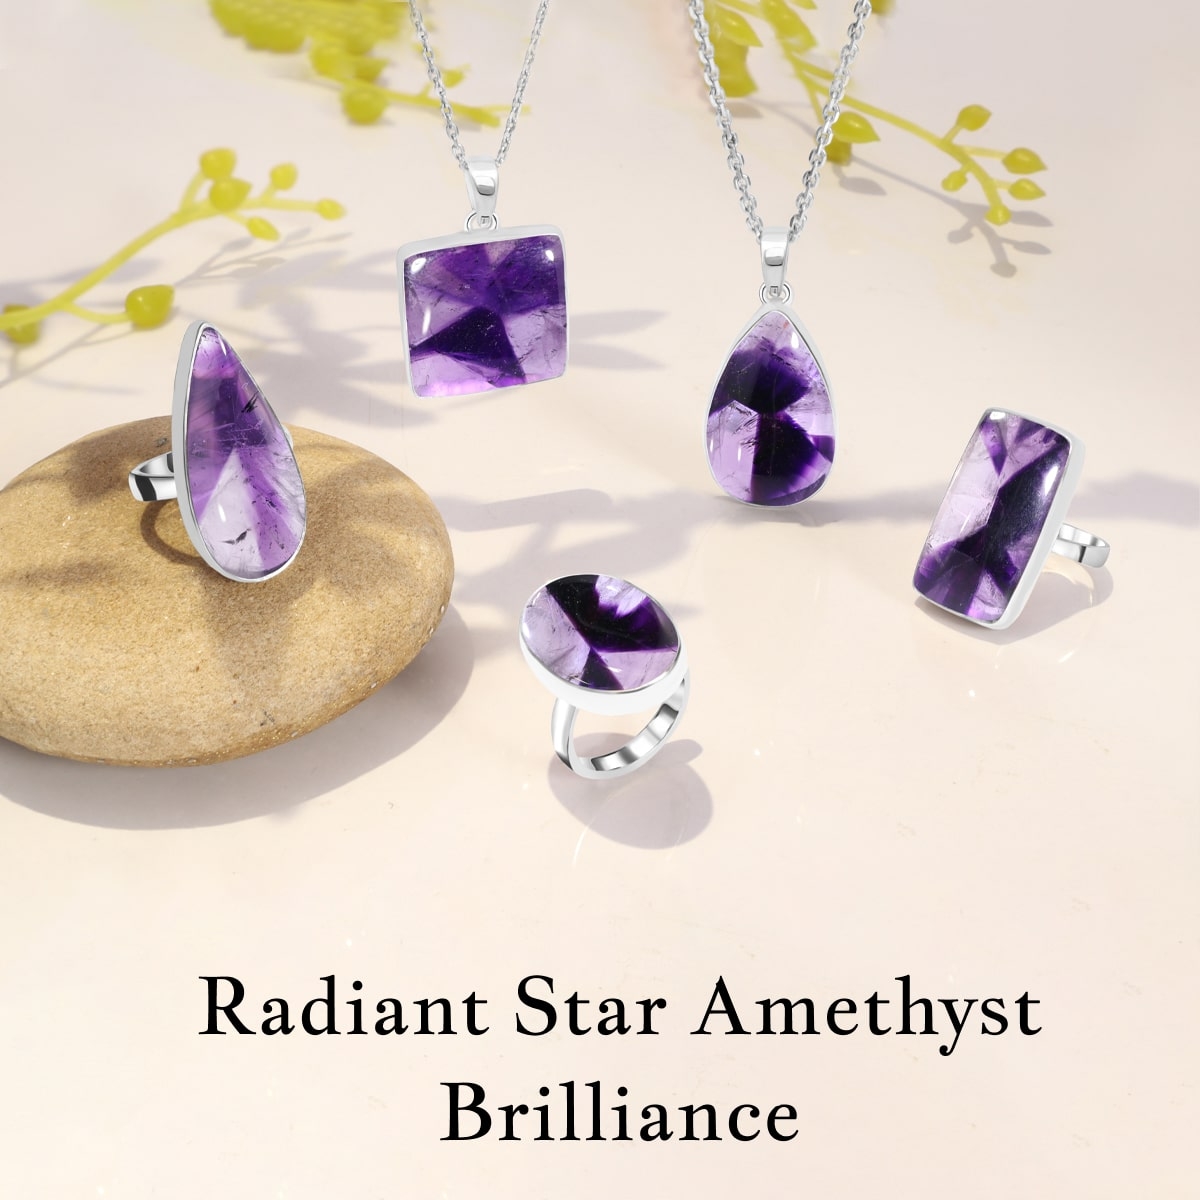 Star Amethyst Radiance: Celestial Charms in Purple Hues